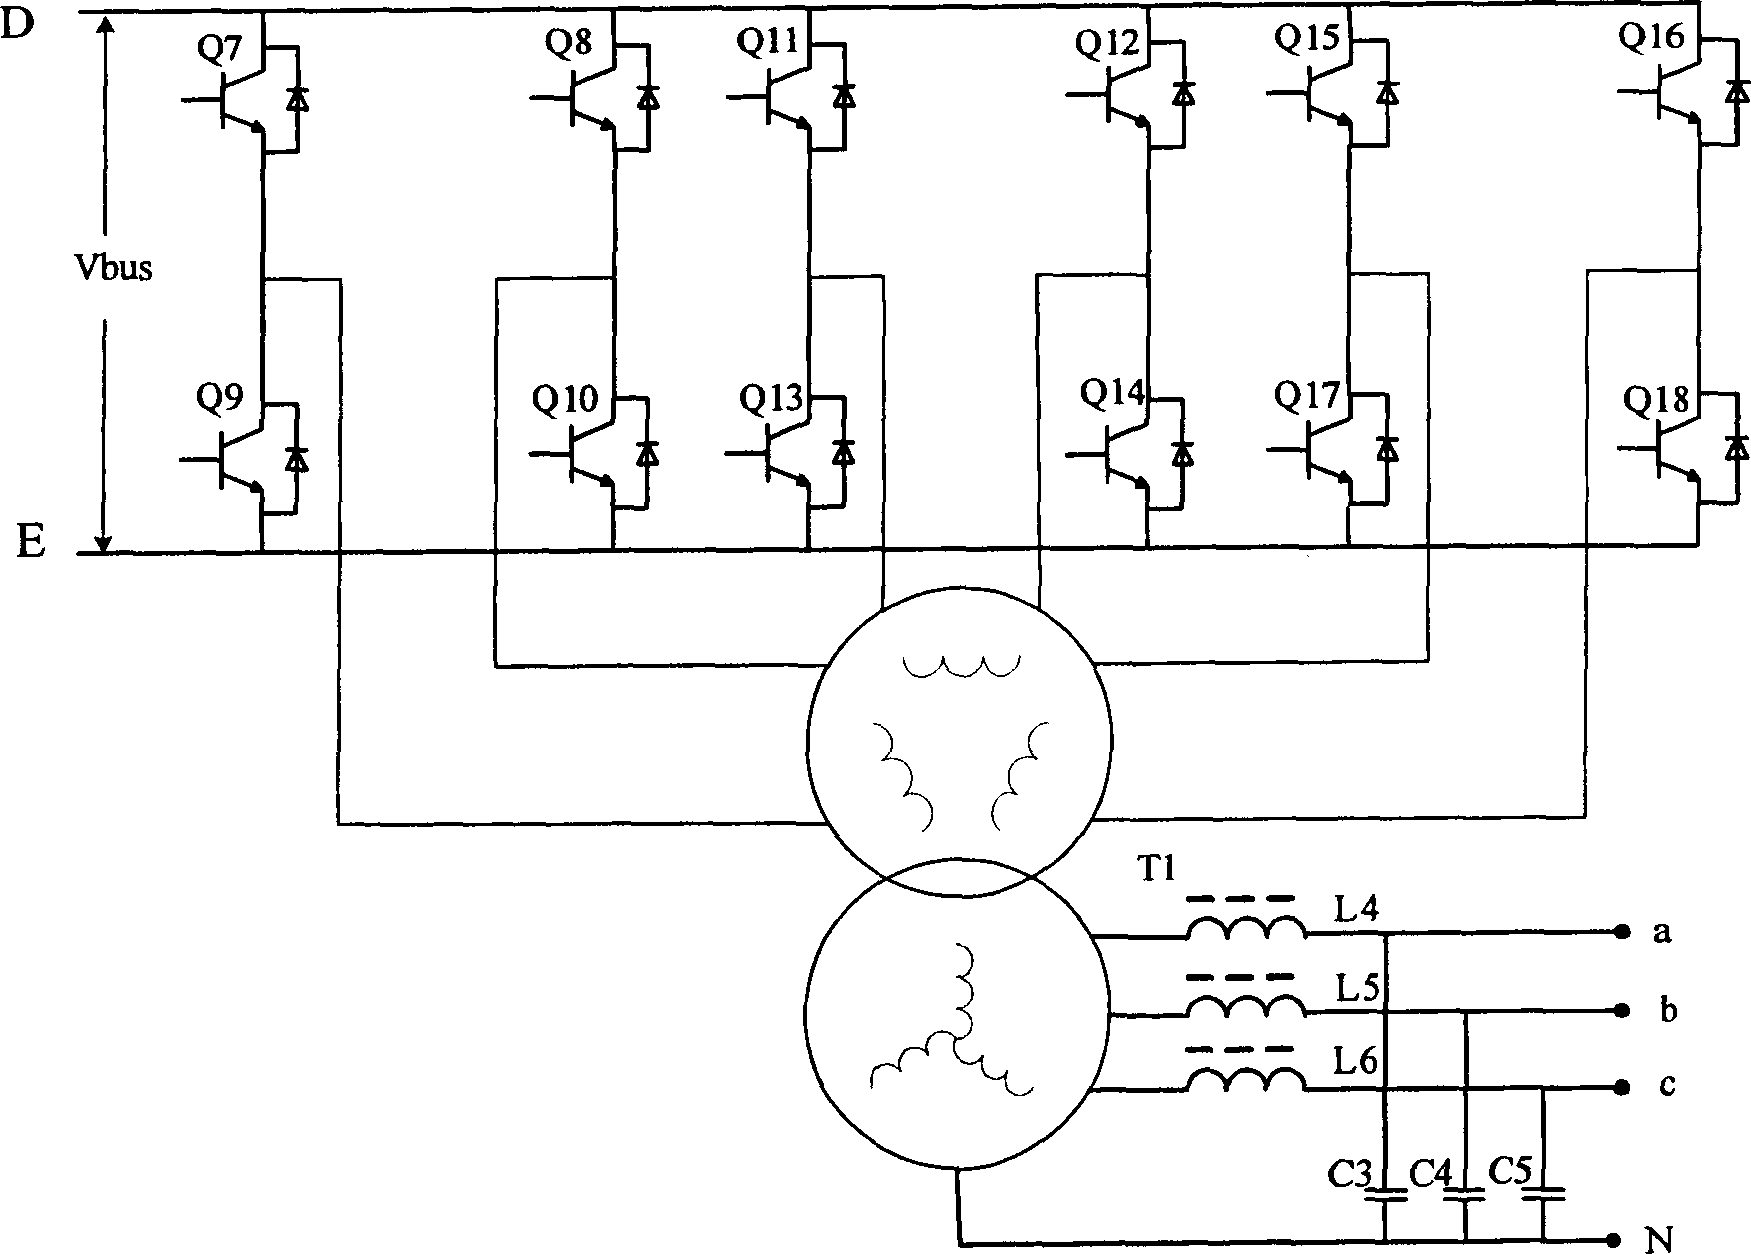 Circuit apparatus applicable to middle and high power UPS